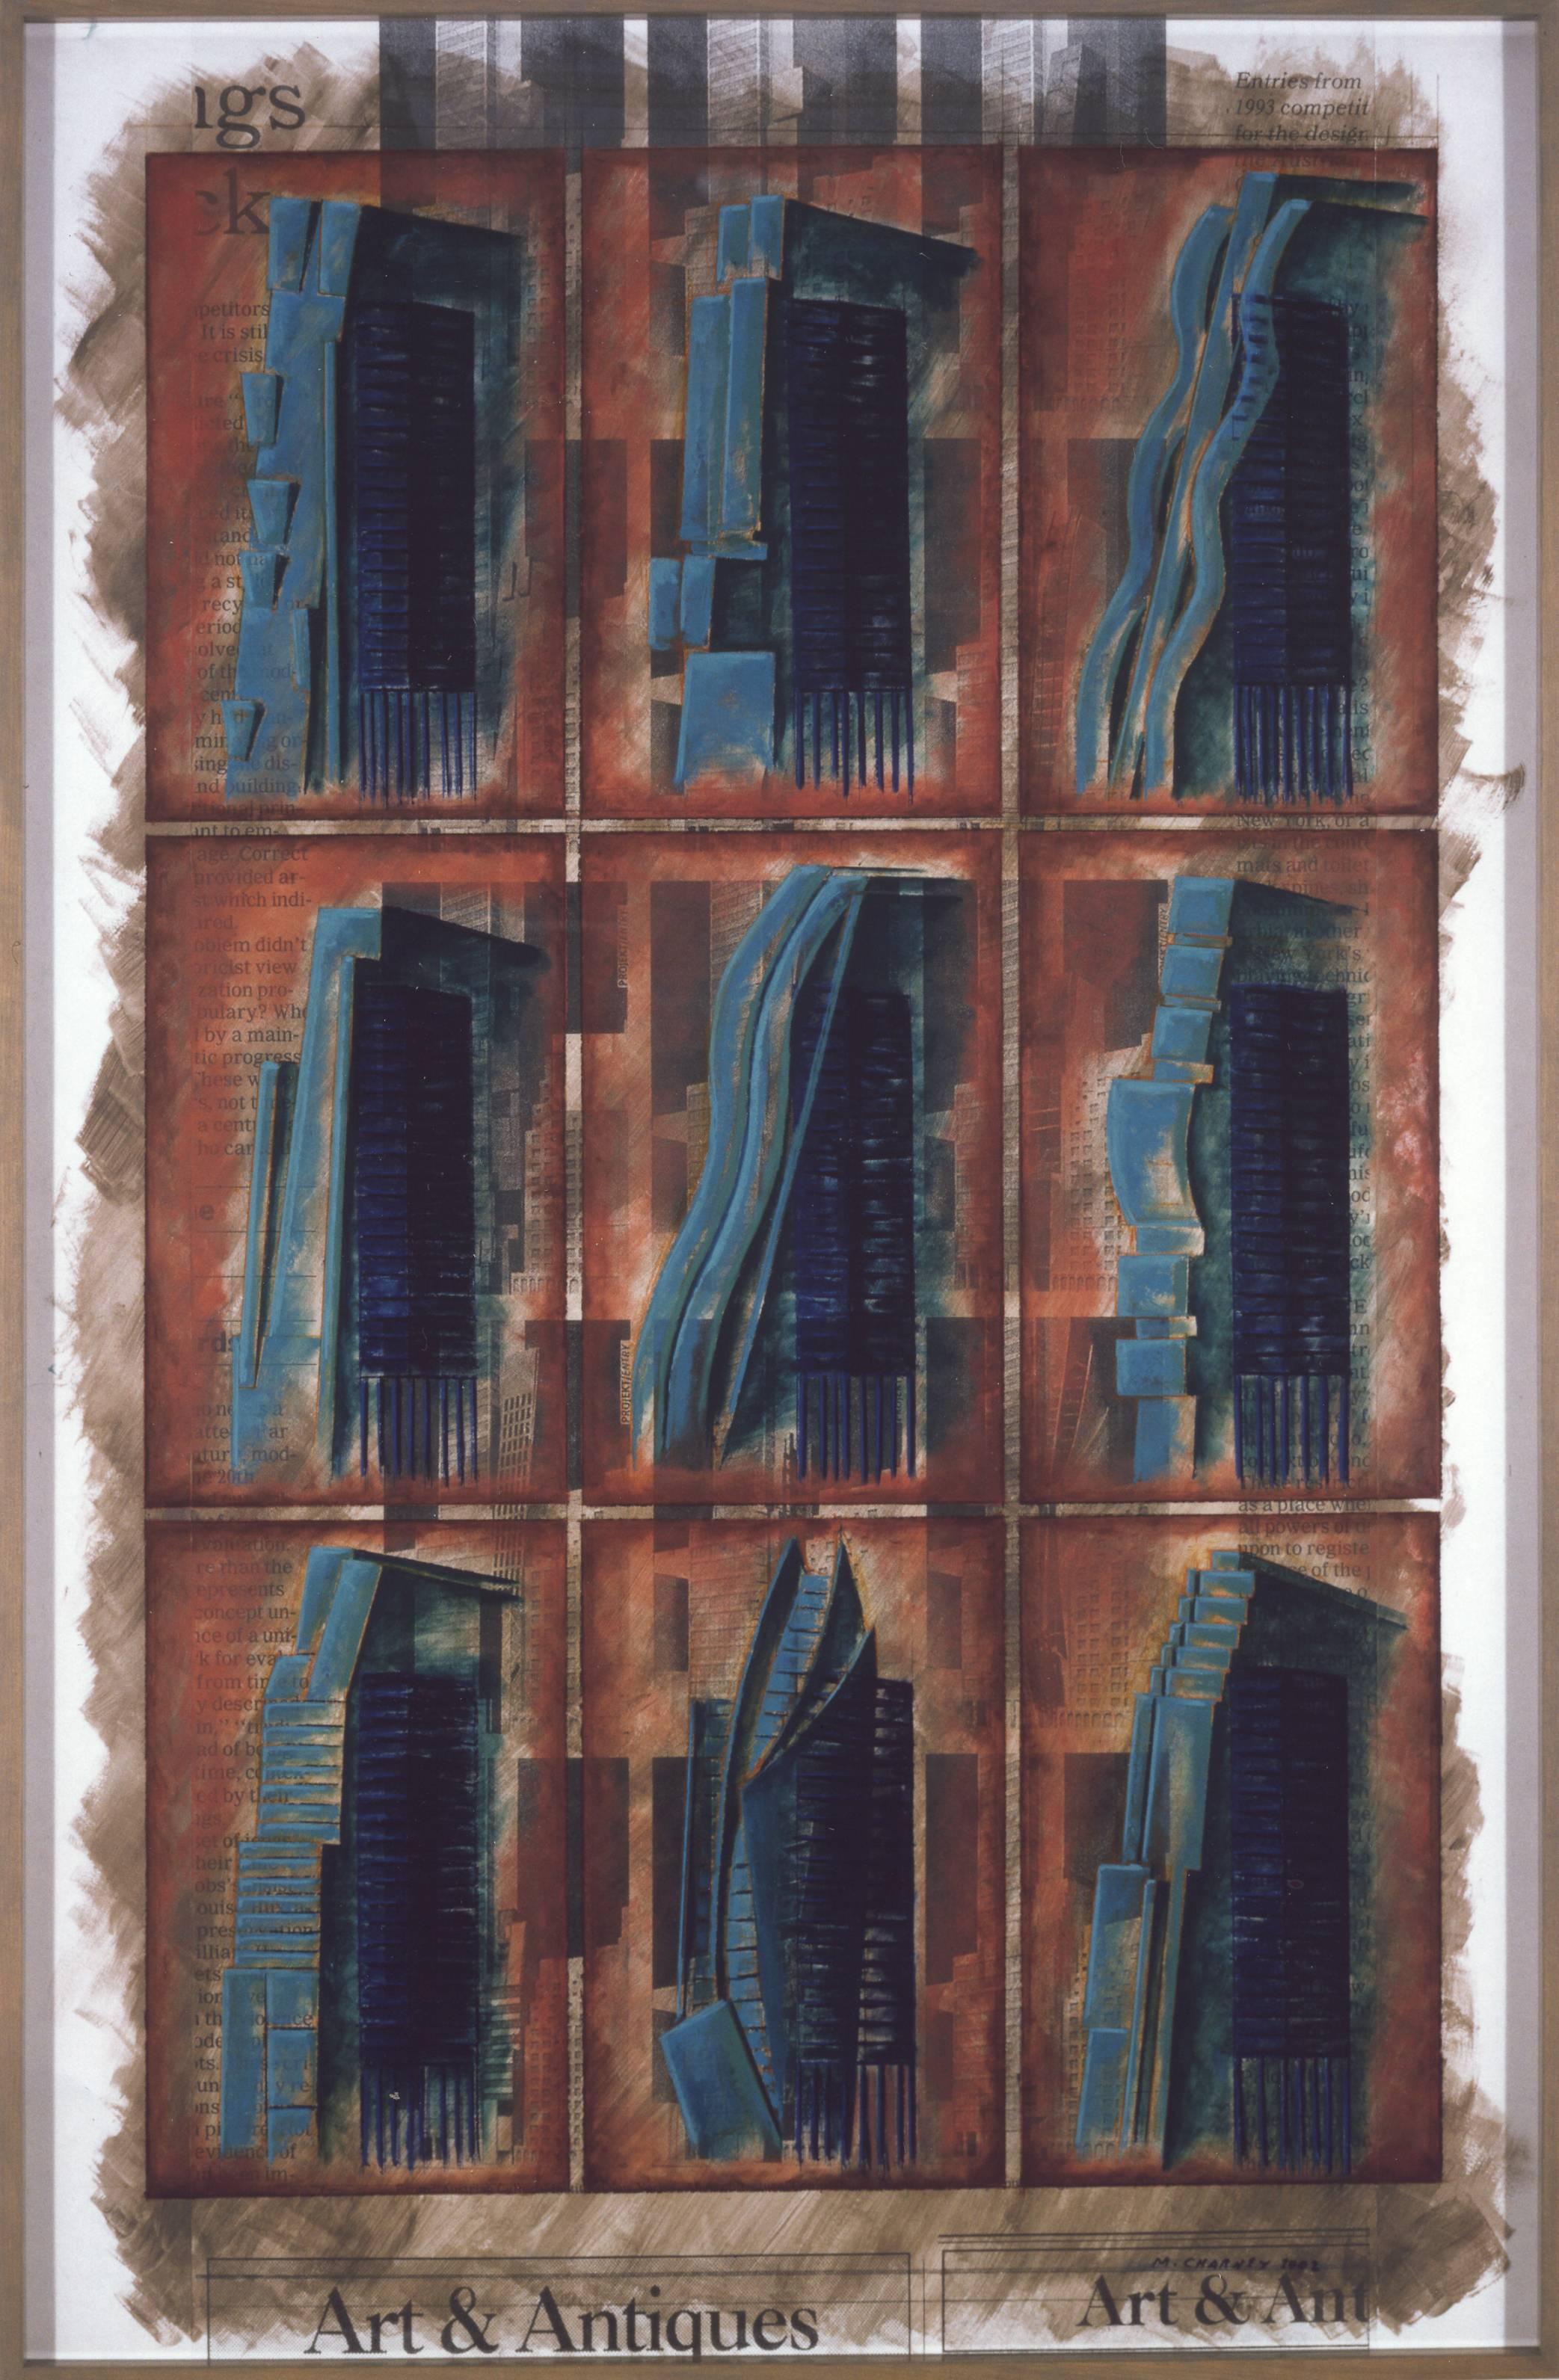 One size fits all / 4: From J.L Durand to Manhattan Skyscraper Culture - Mixed Media Art by Melvin Charney